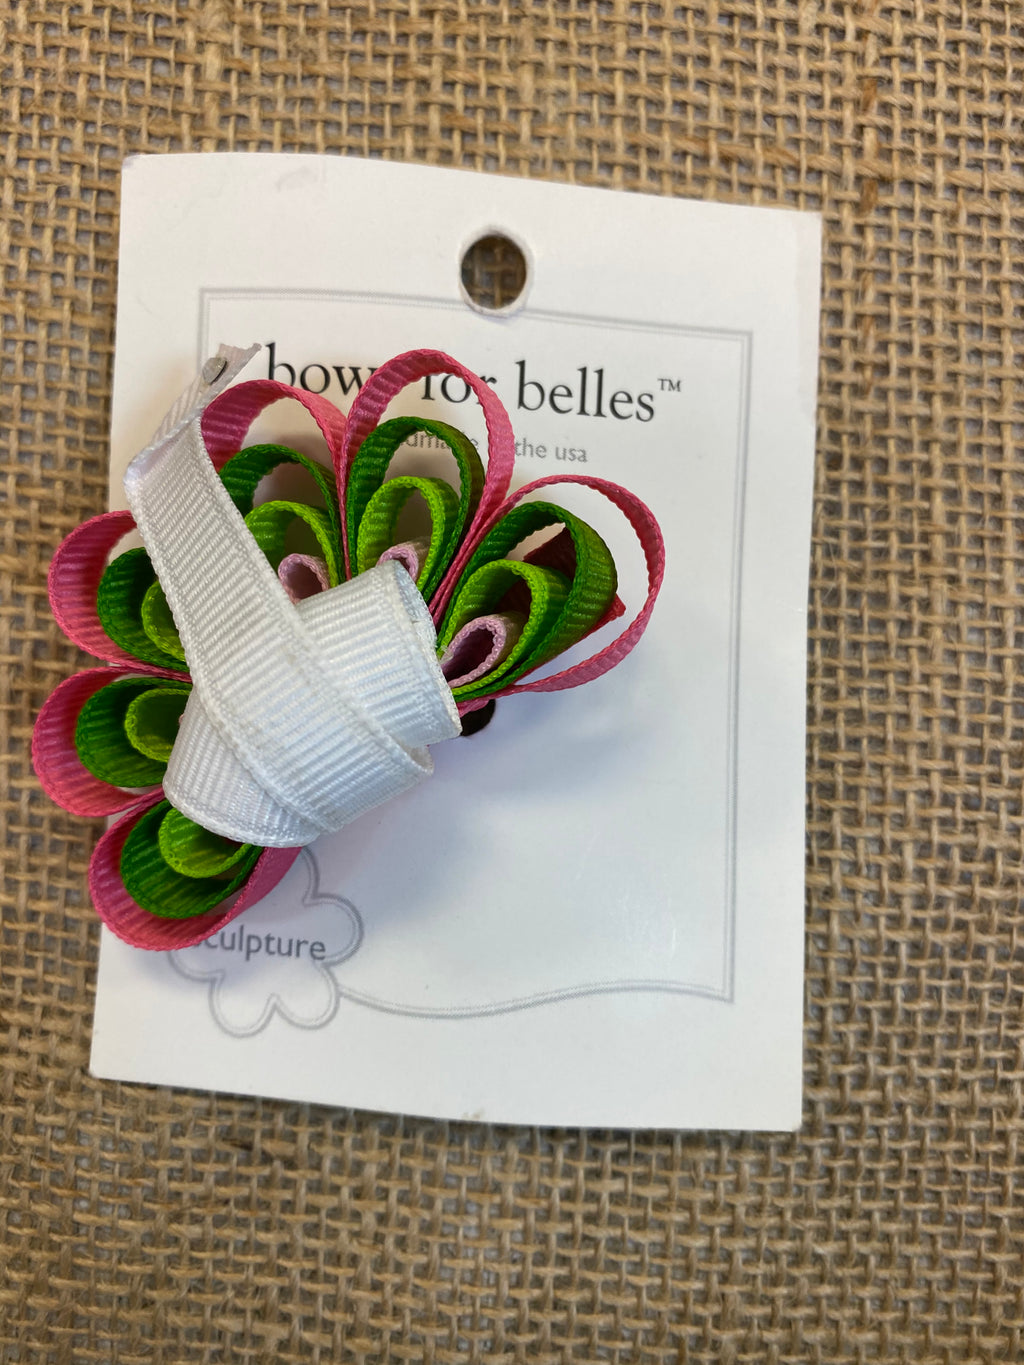 Bows for Belles Pink and Green Flower Bow